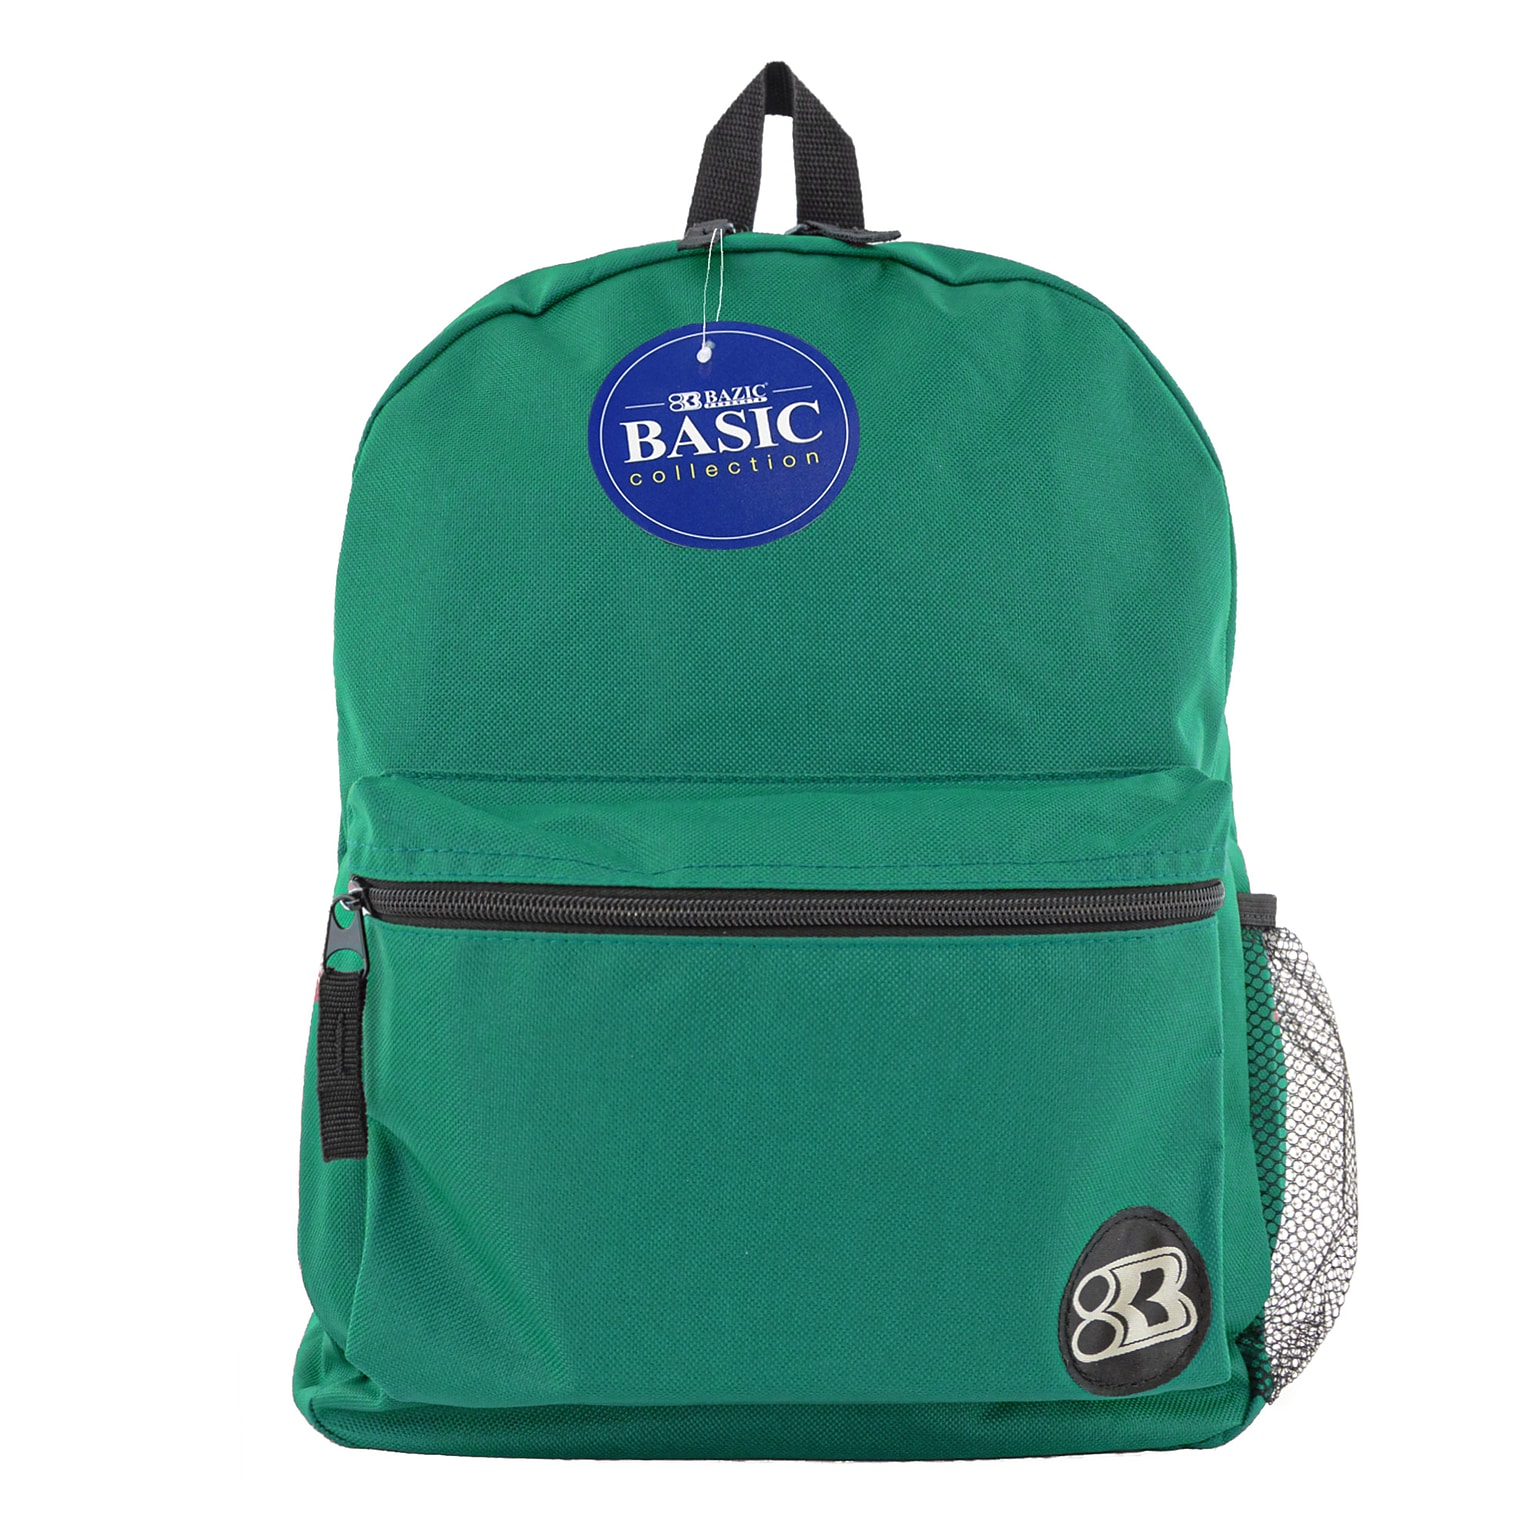 BAZIC Basic Collection Polyester School Backpack, Solid, Green (BAZ1033)